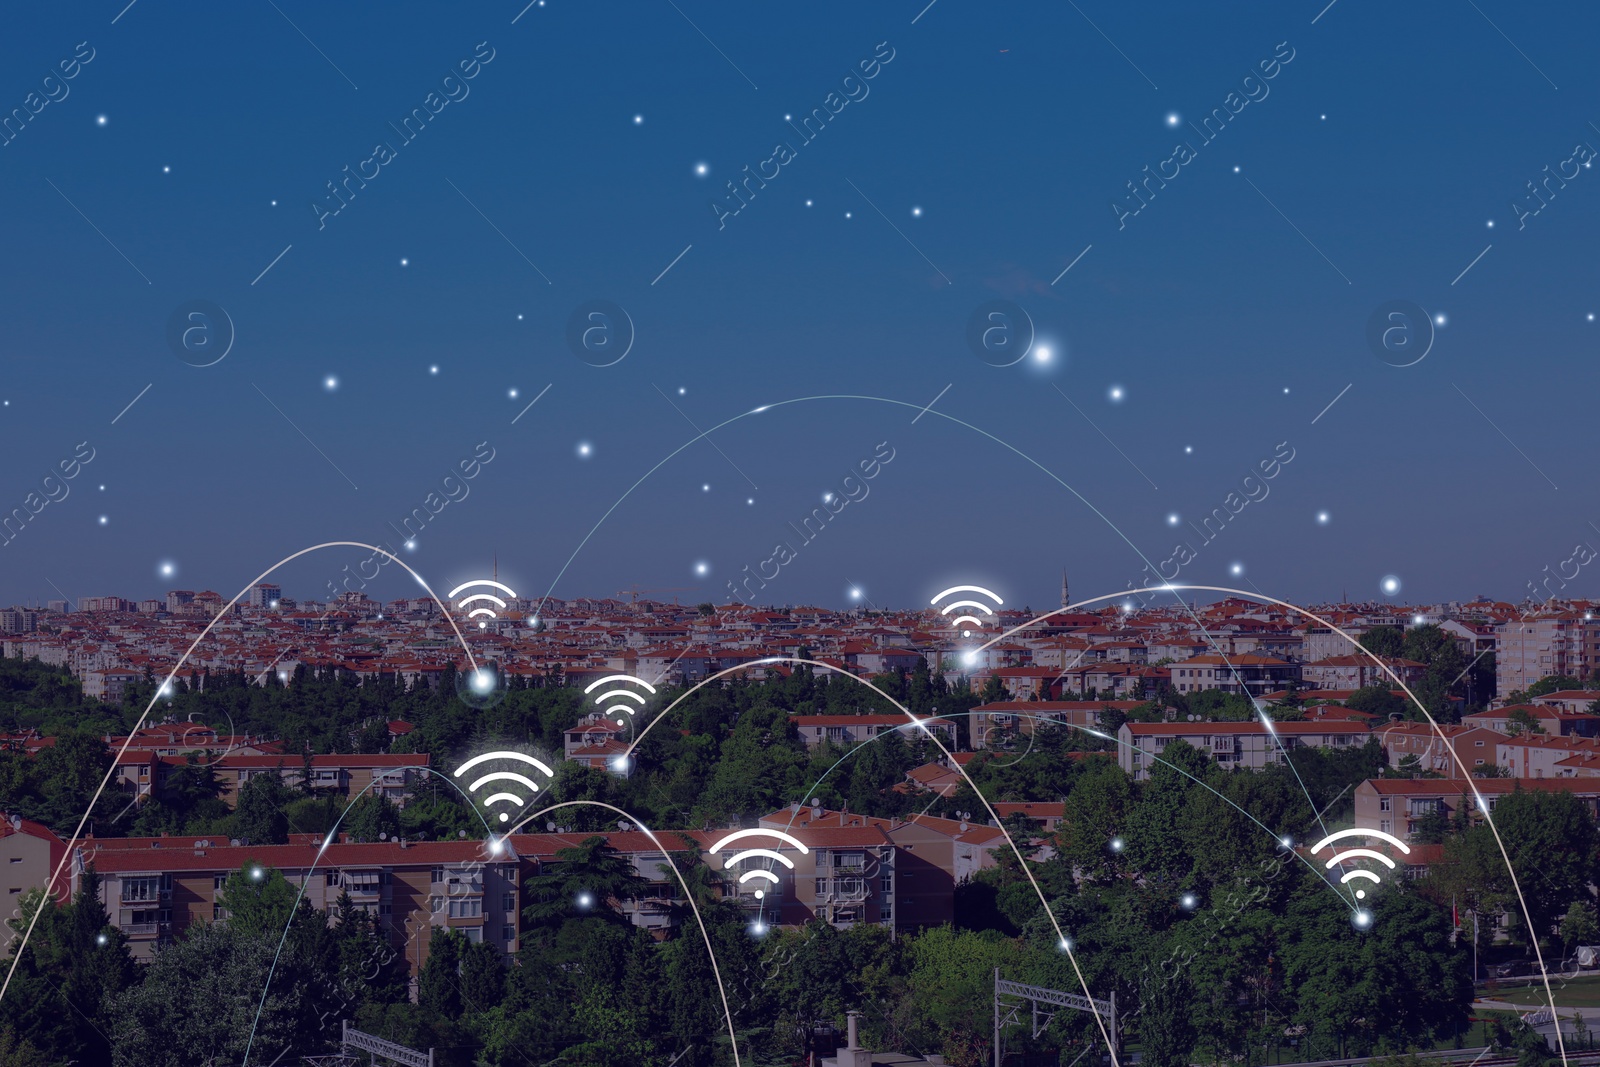 Image of Picturesque view of city with buildings and wi-fi symbols